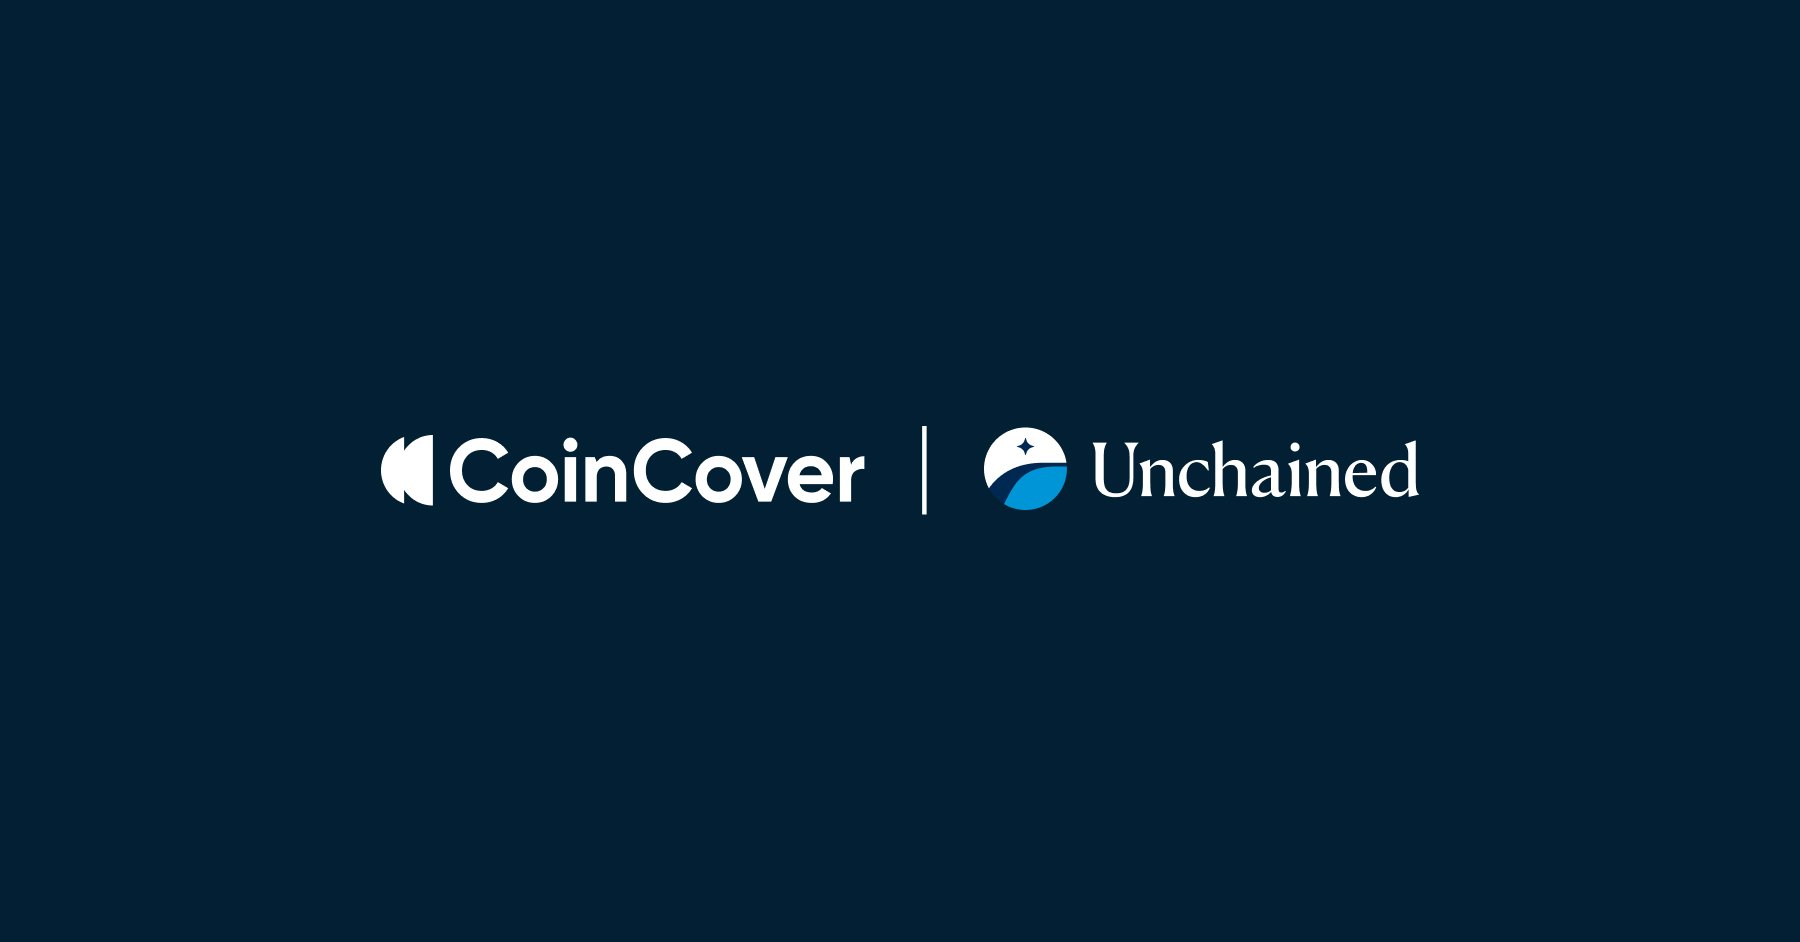 Unchained adds Coincover to its Collaborative Custody Network, Delivering a New Model For Bitcoin Custody